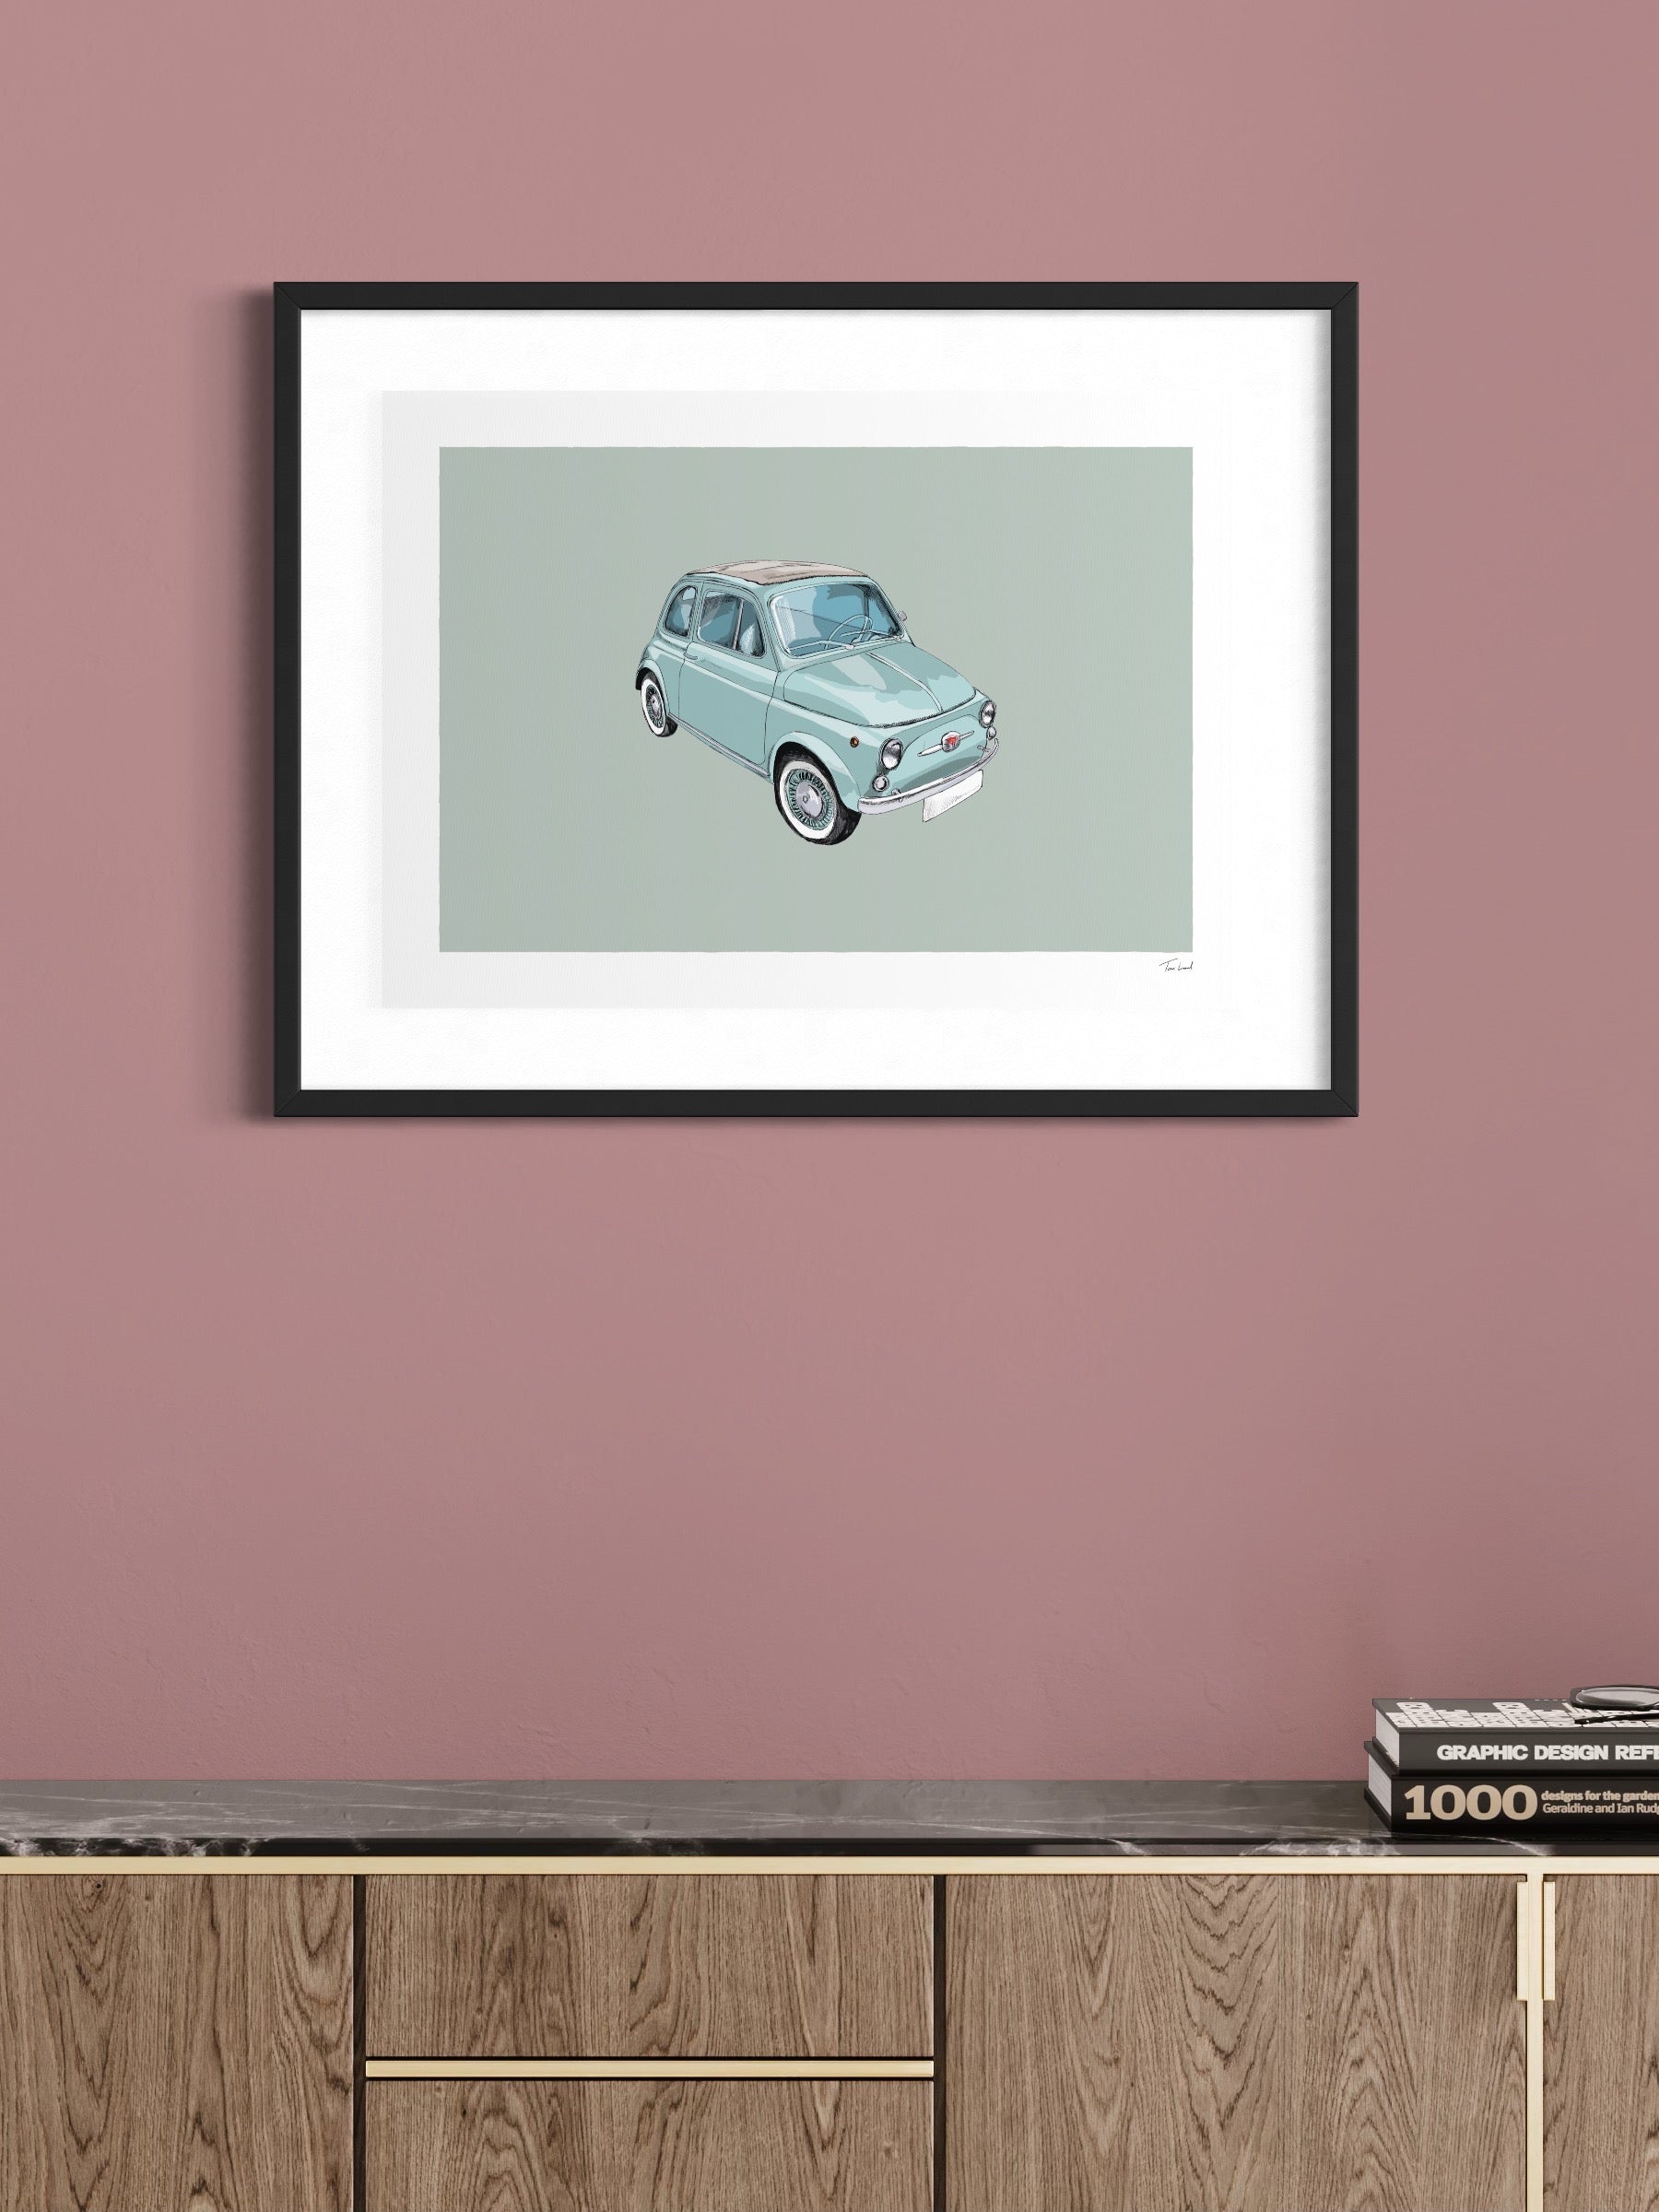 This image shows a giclee wall art print by Tom Laird Illustration of the Italian classic car, the Fiat 500, framed in a beautiful living room with tasteful modern home decor. This art print of a blue example is available from Tom Laird Illustration in a variety of sizes.